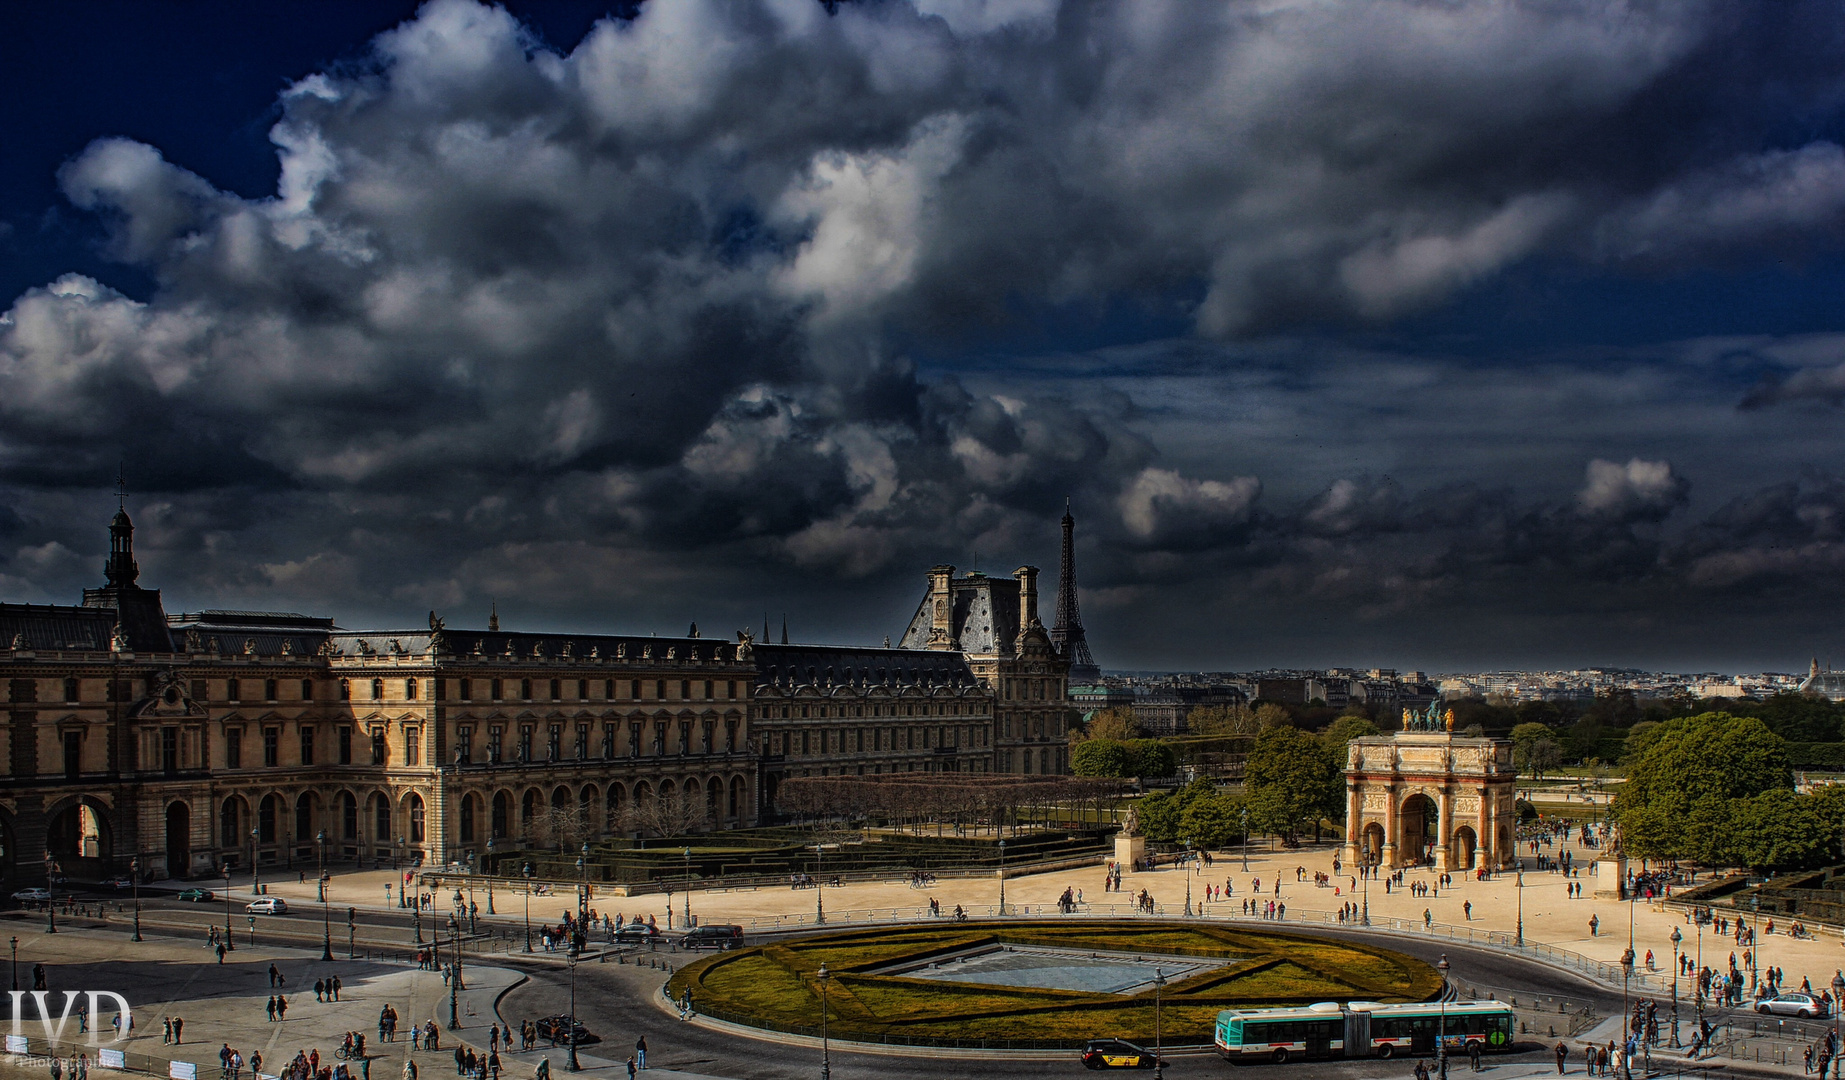 View Louvre